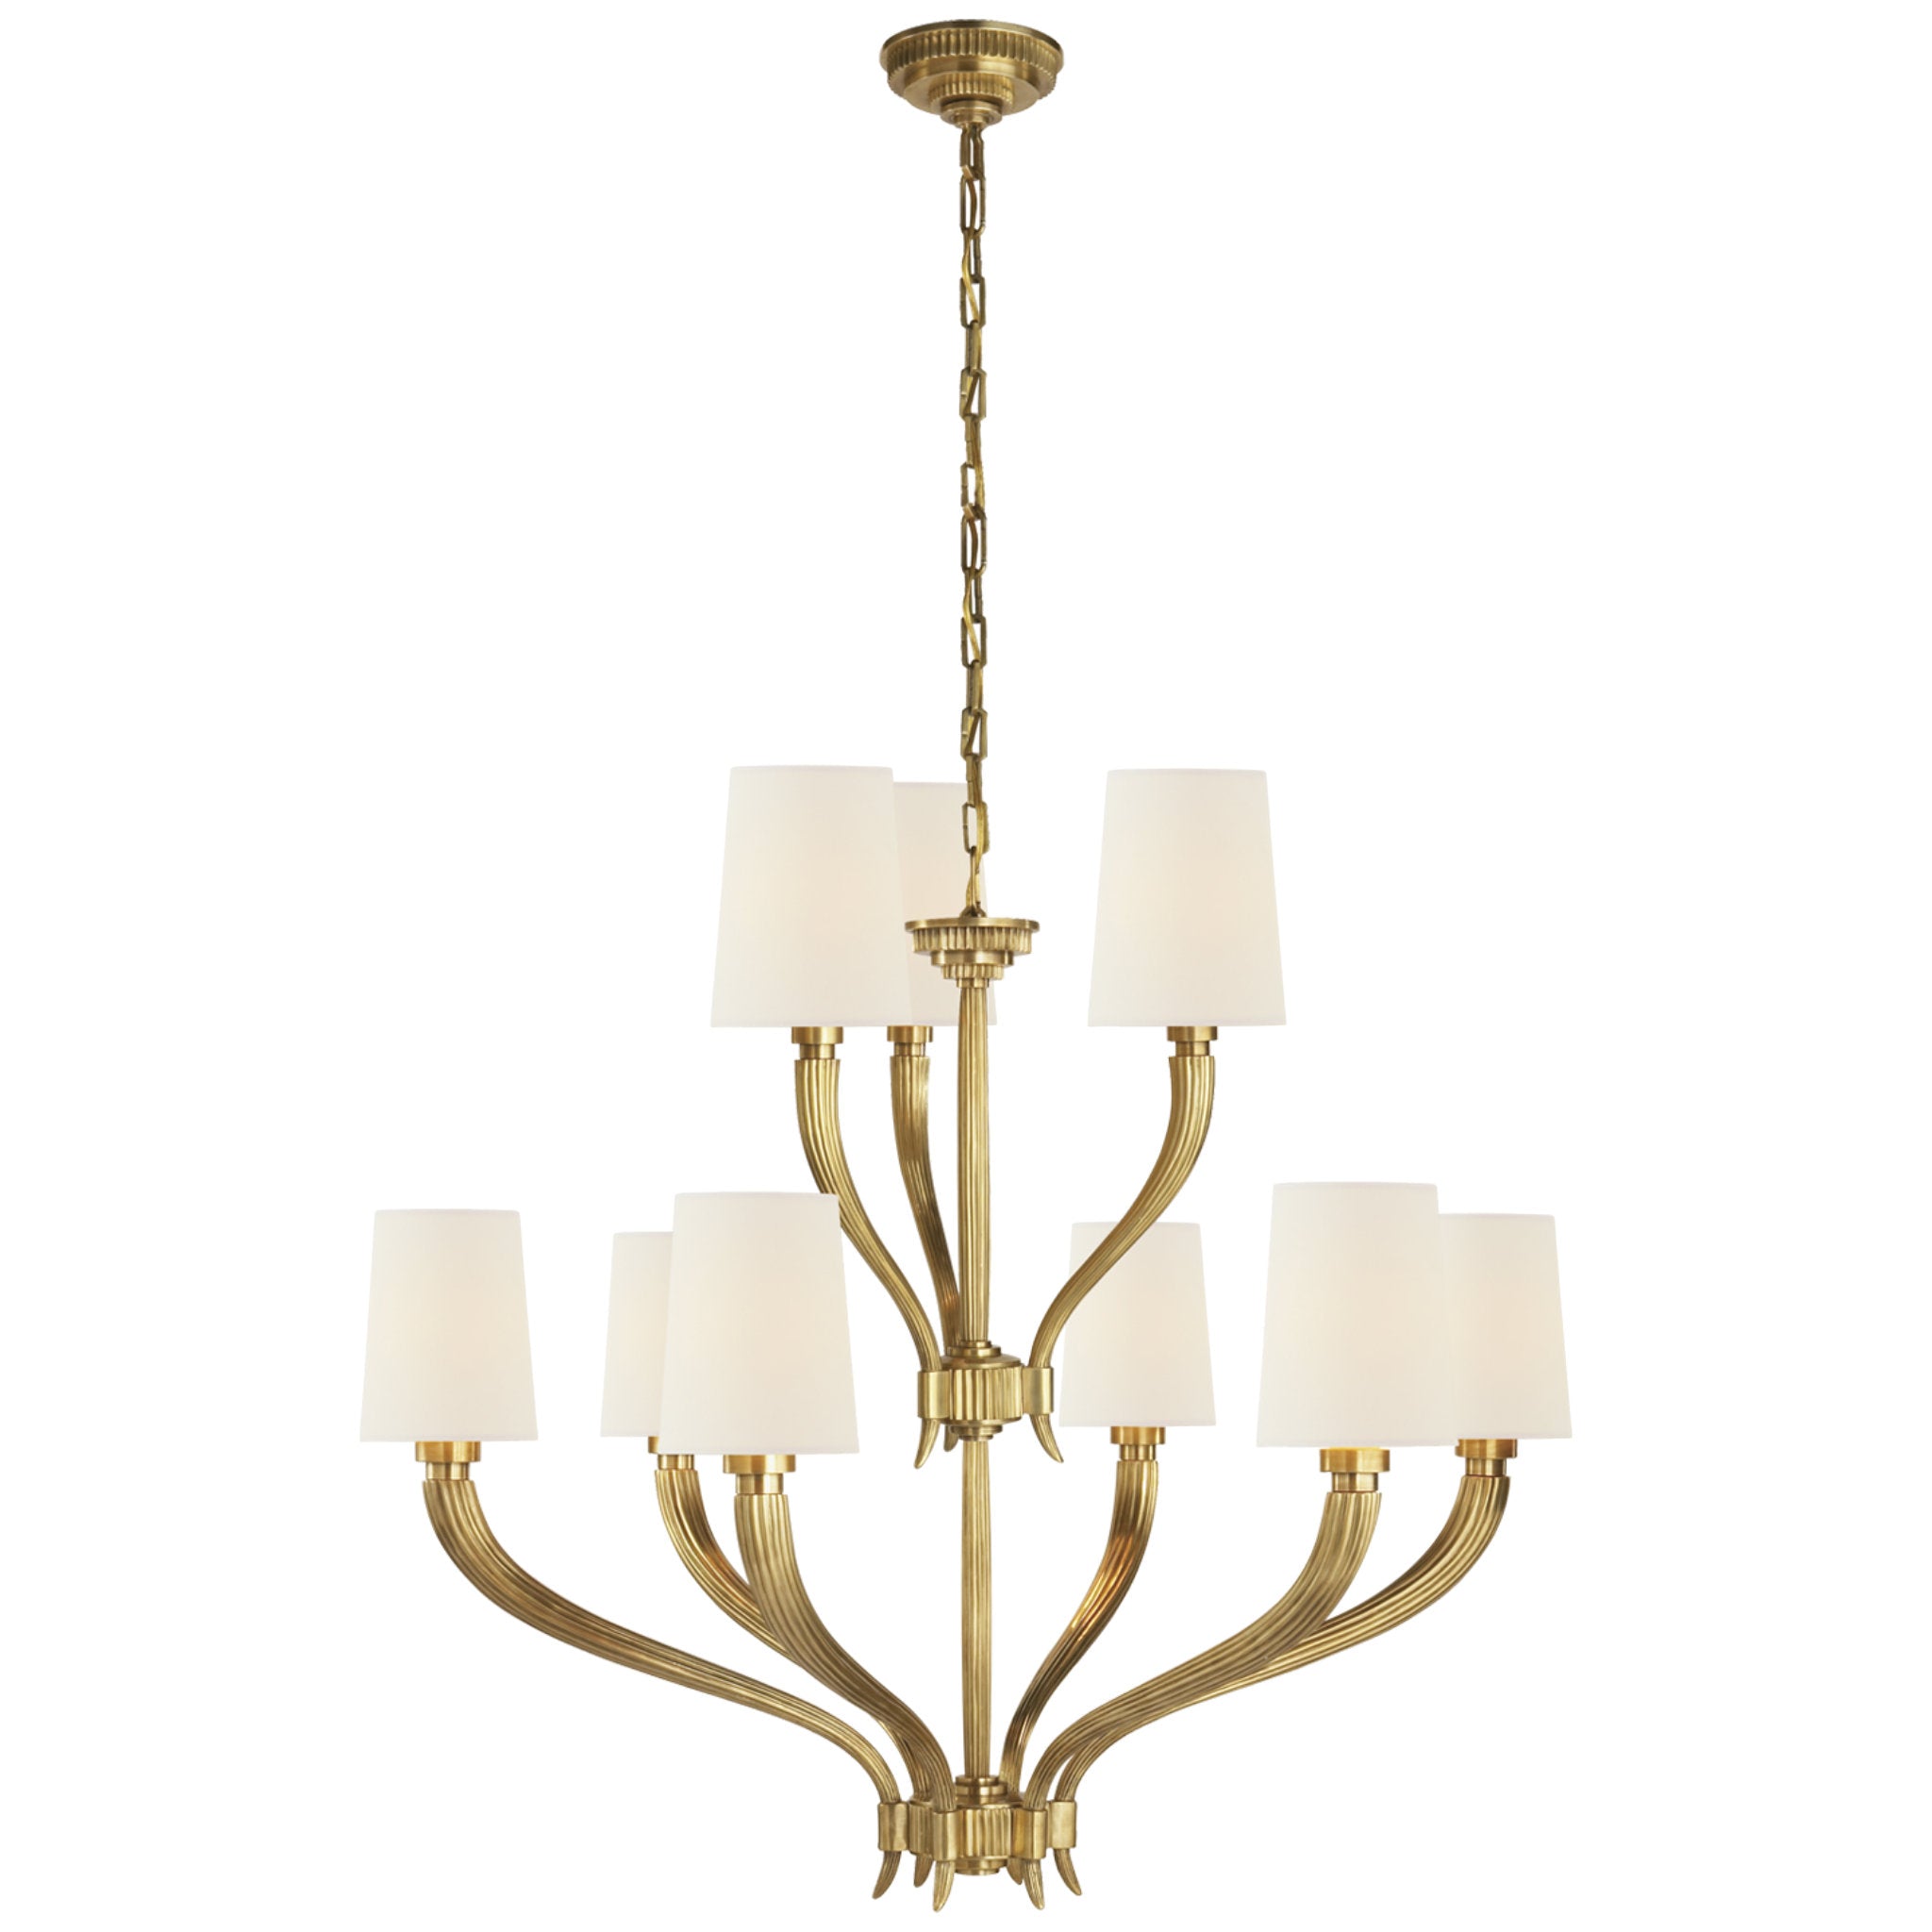 Chapman & Myers Classic Ring Chandelier in Hand-Rubbed Antique Brass w